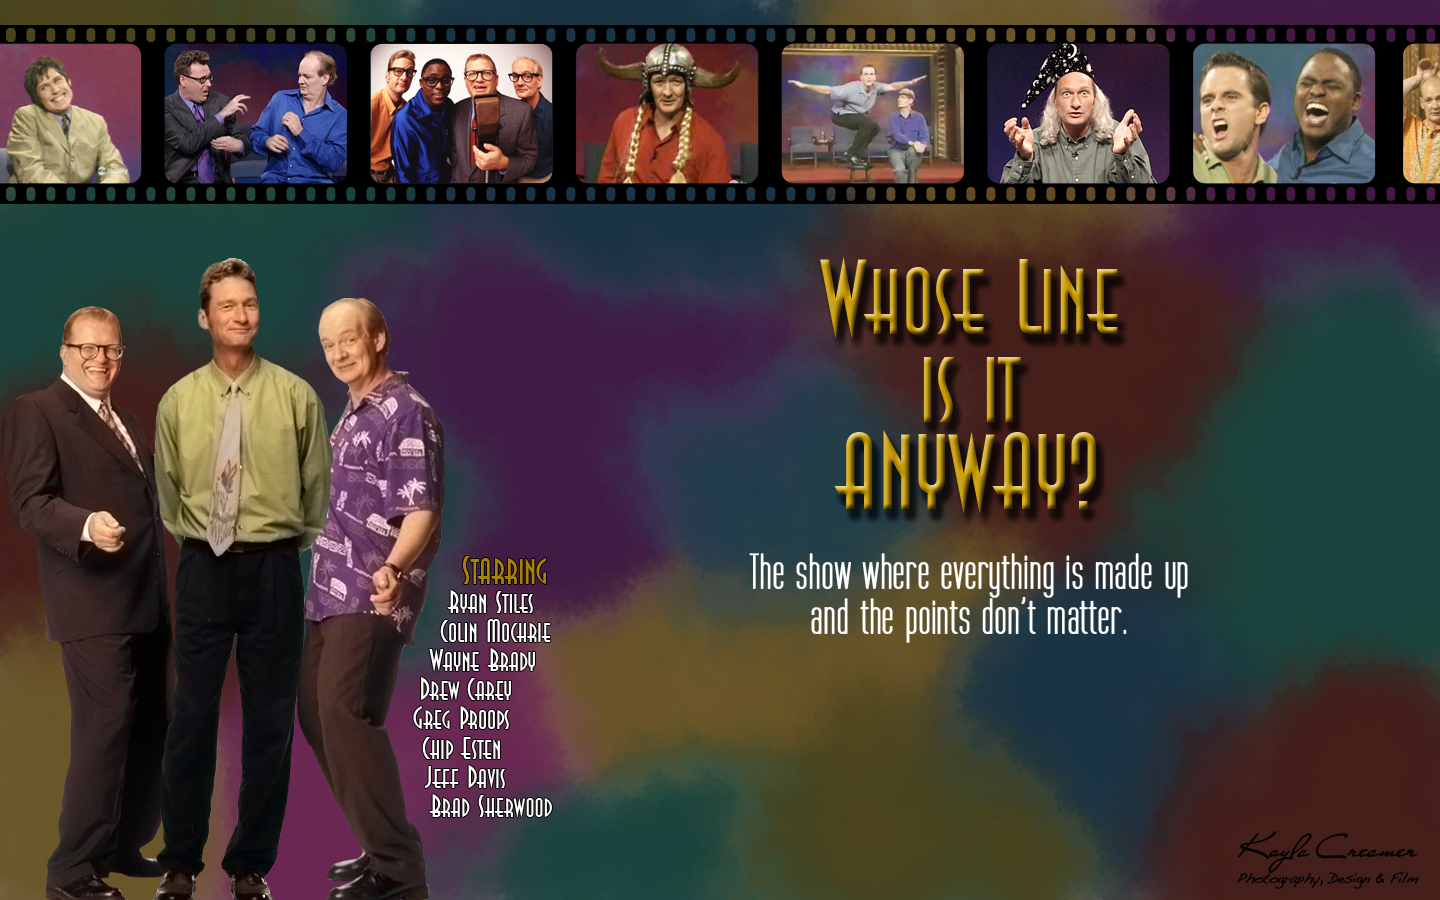 Whose Line Is It Anyway Image The Show Where